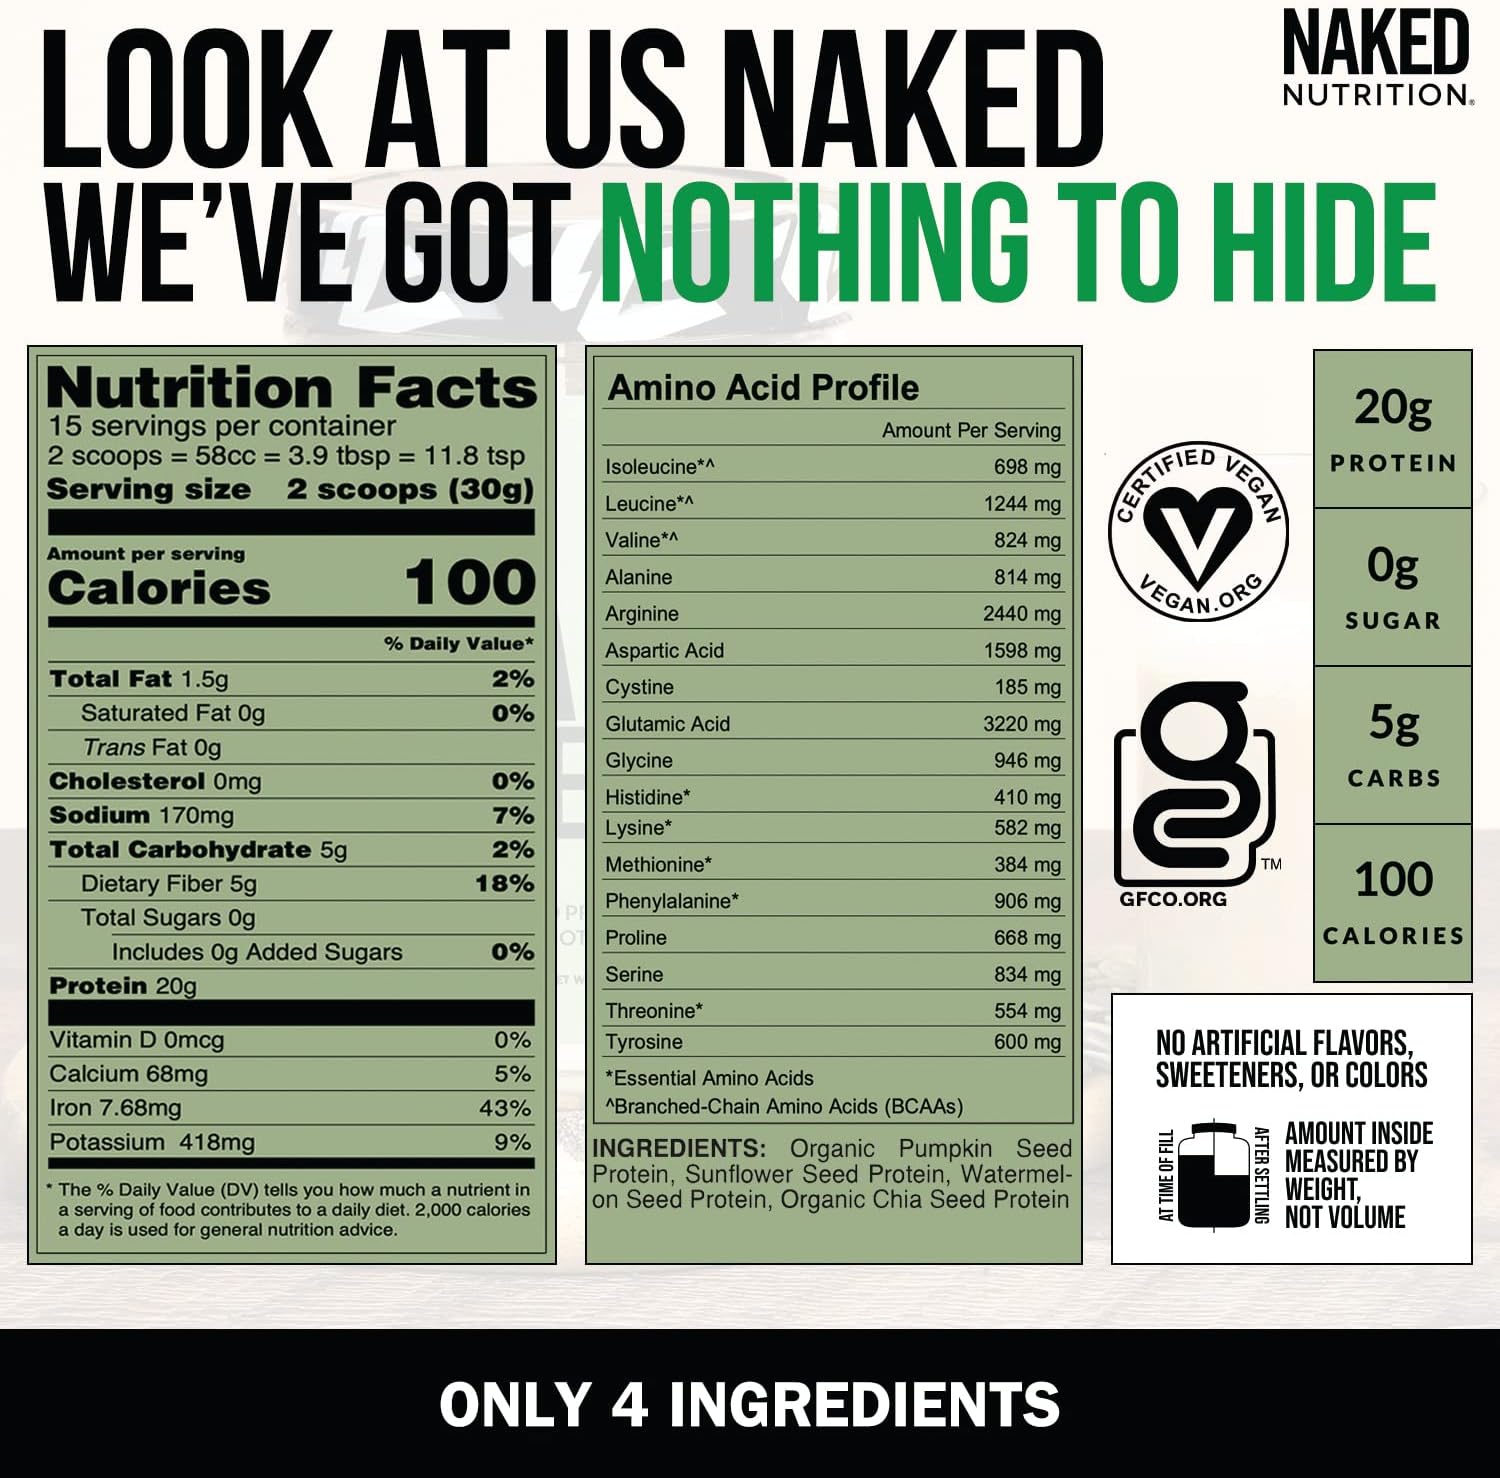 NAKED nutrition Naked Seed - 4 Seed Protein Powder, Only 4 Ingredients - Chia, Watermelon, Sunflower and Pumpkin Seed - Gluten-Free, Soy Free, Vegan, No Gmos, No Artificial Sweeteners - 15 Servings : Health & Household